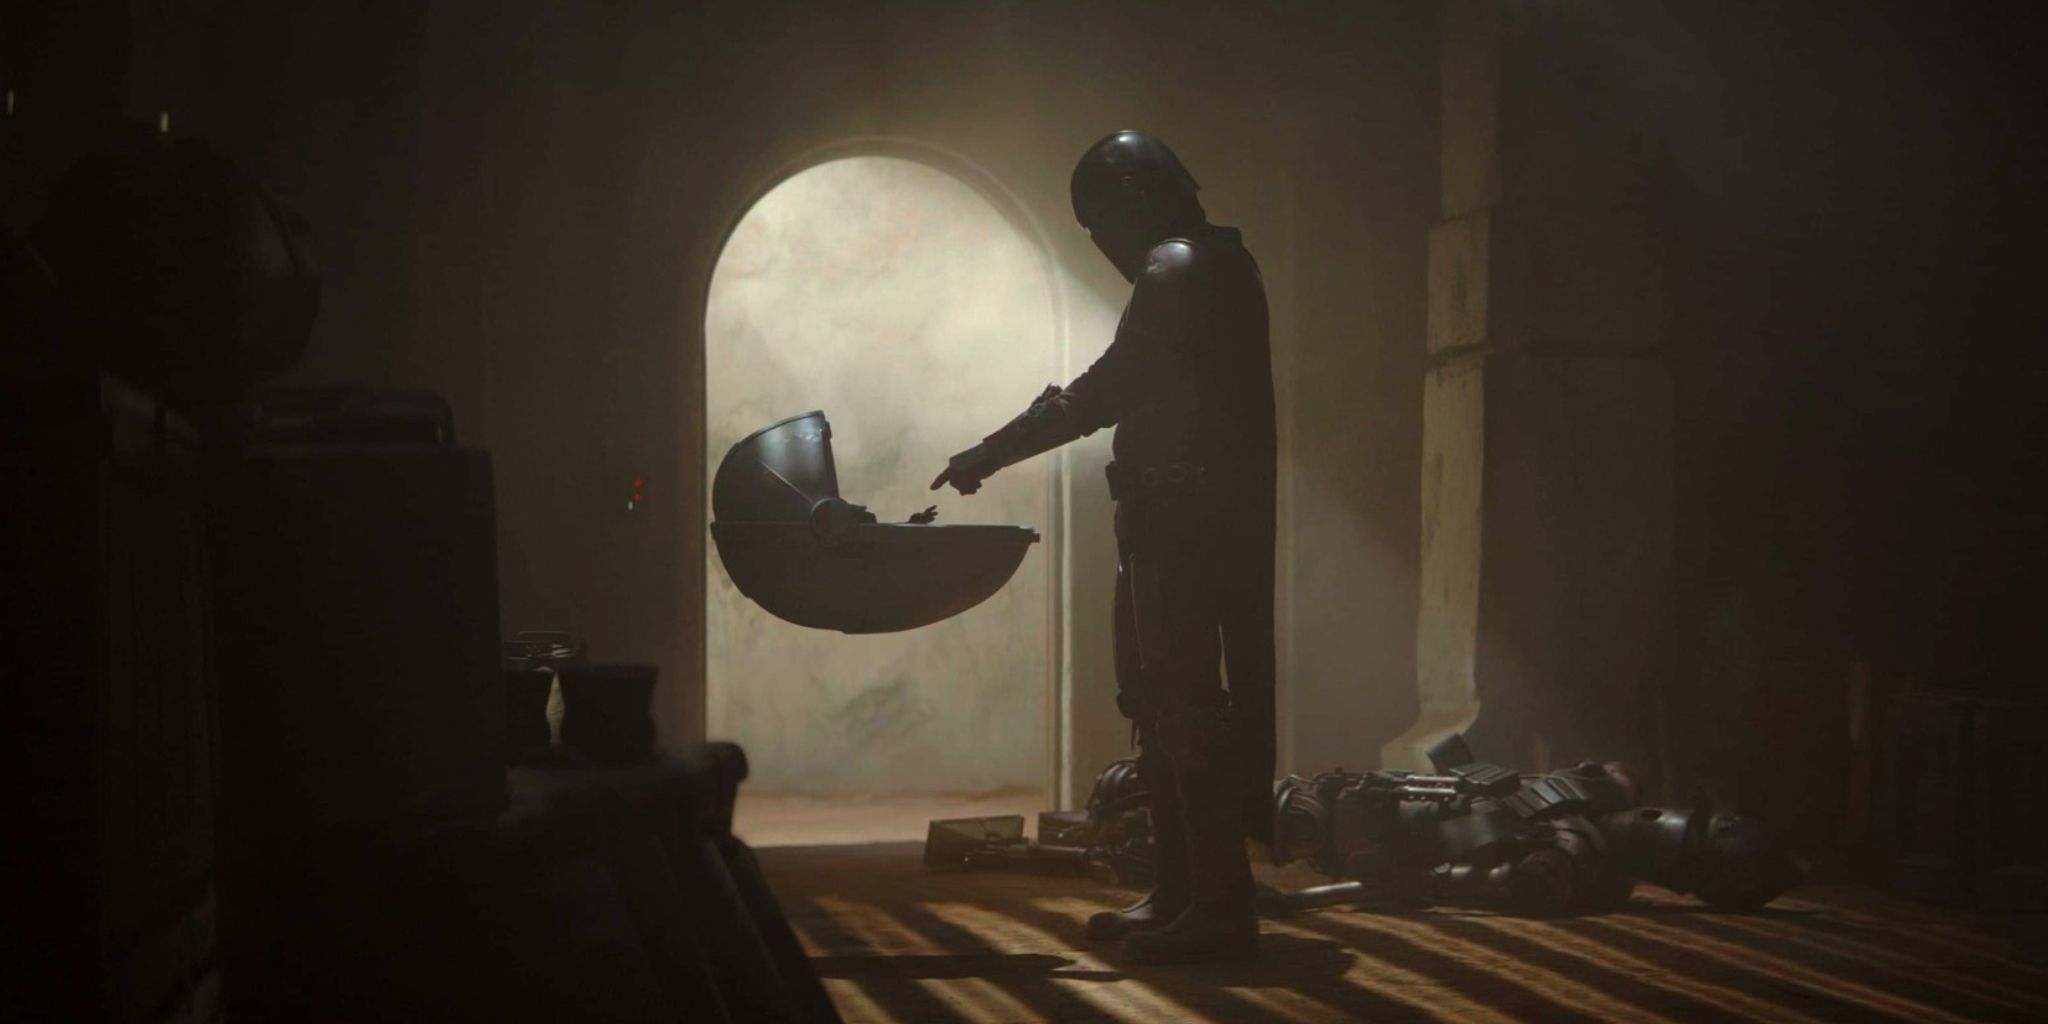 Din Djarin reaches his finger out to Grogu in The Mandalorian season 1 episode 1